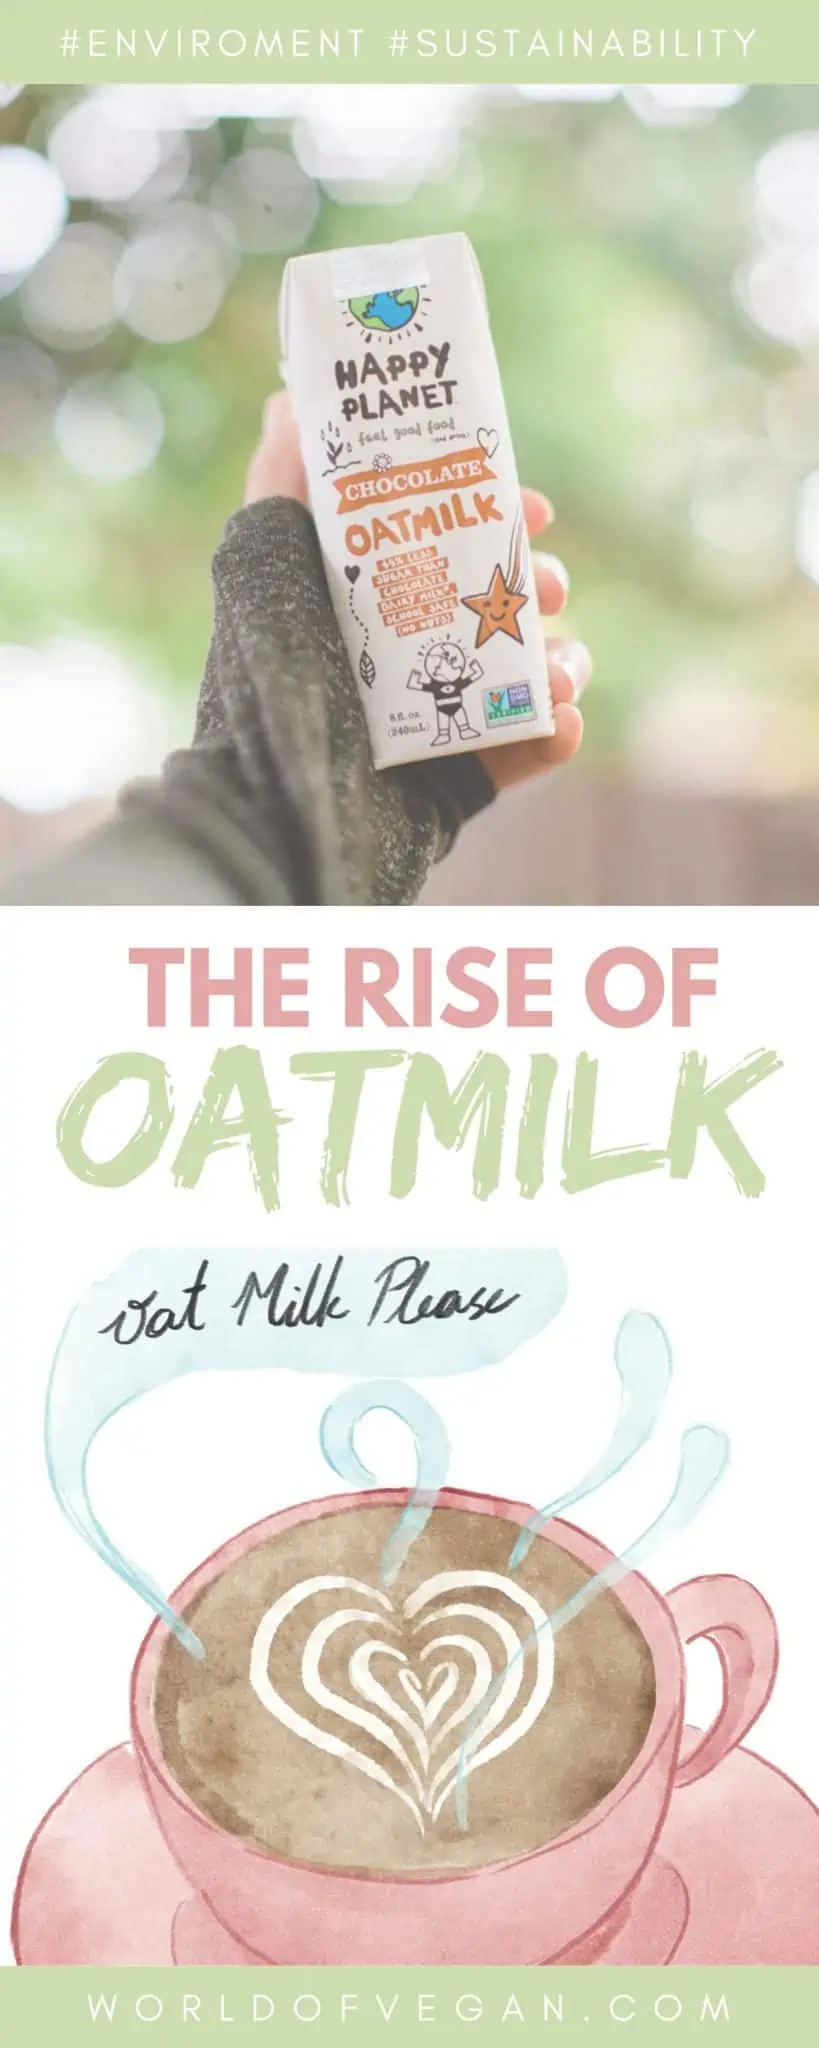 The Rise of Oatmilk Graphic